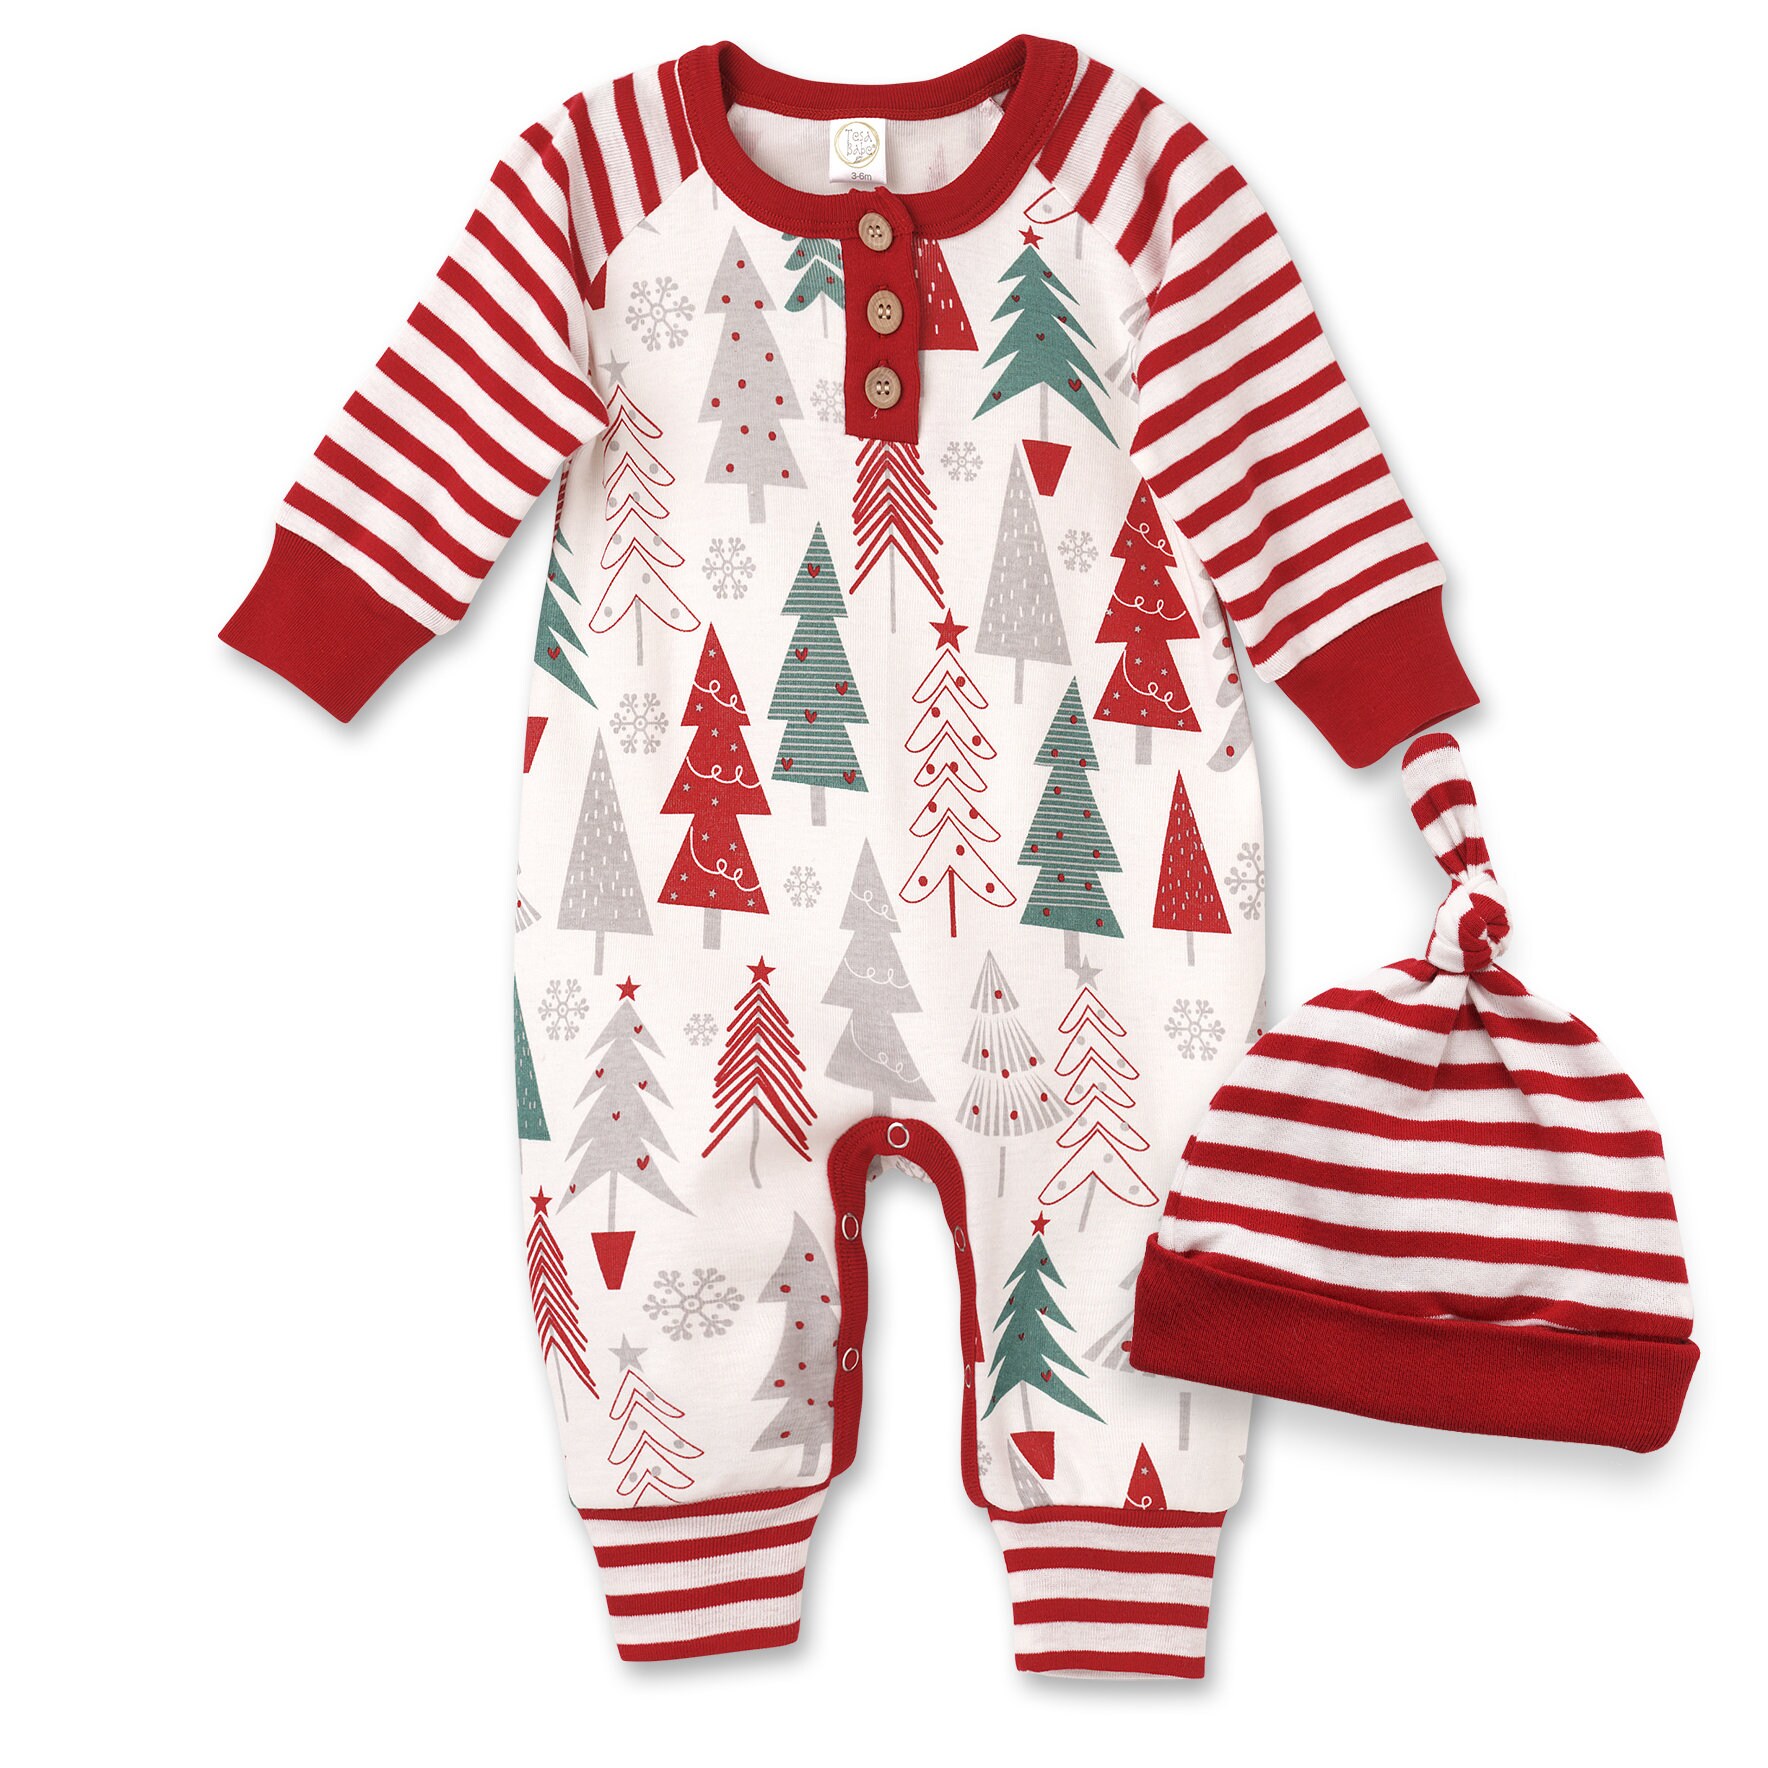 FeMereina Newborn Baby Girls Boys Christmas Outfit Long Sleeve Knit Deer Romper Jumpsuit Pajamas Xmas Clothes My 1st Christmas 